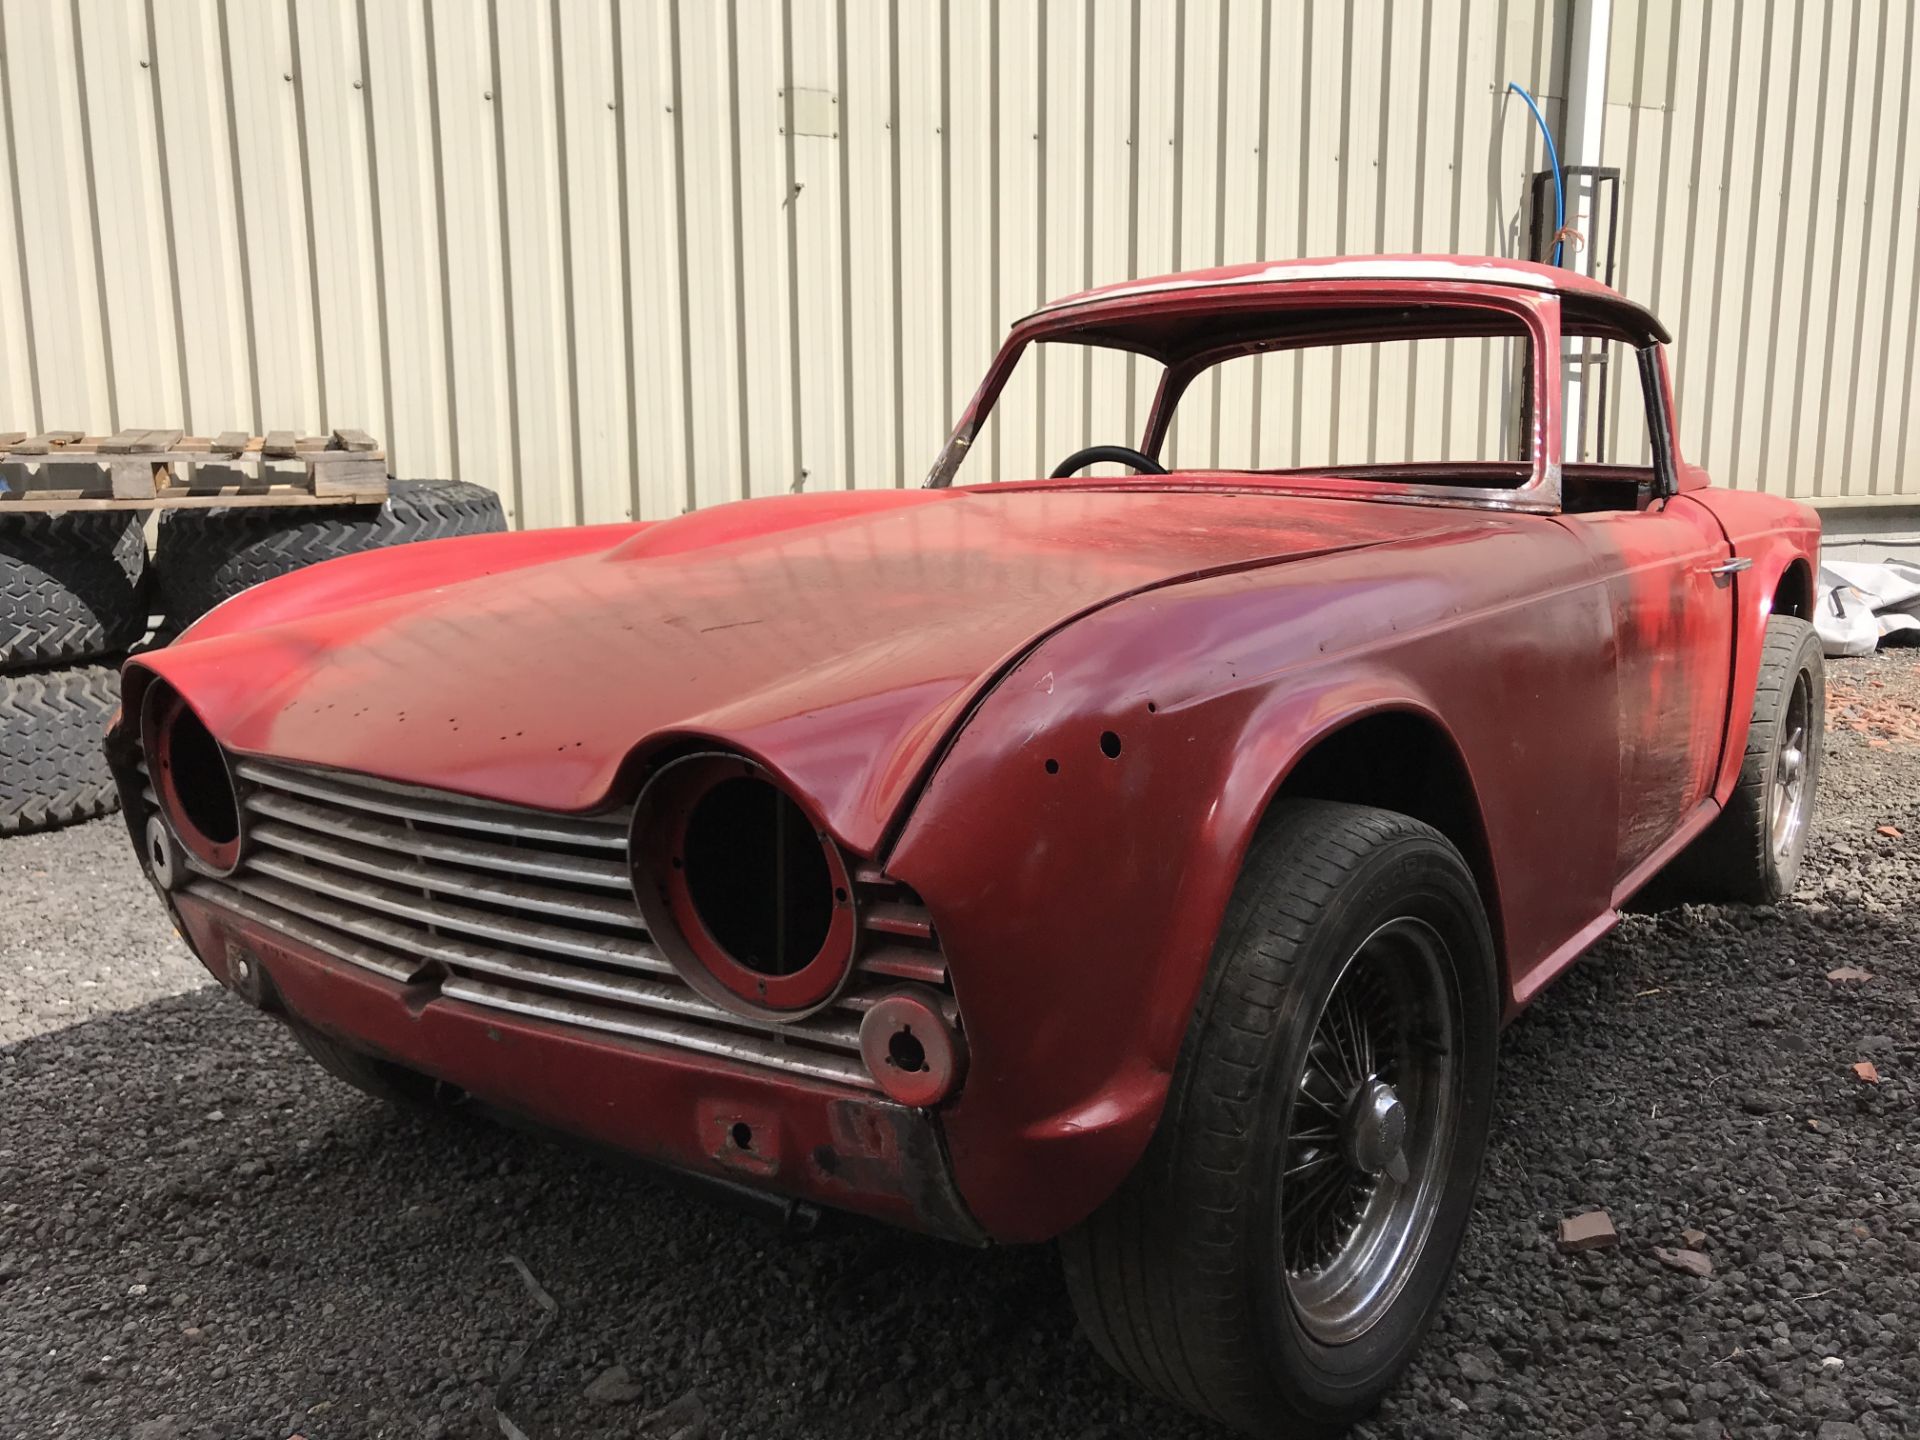 Triumph TR4 with Optional Hardtop - Image 62 of 64